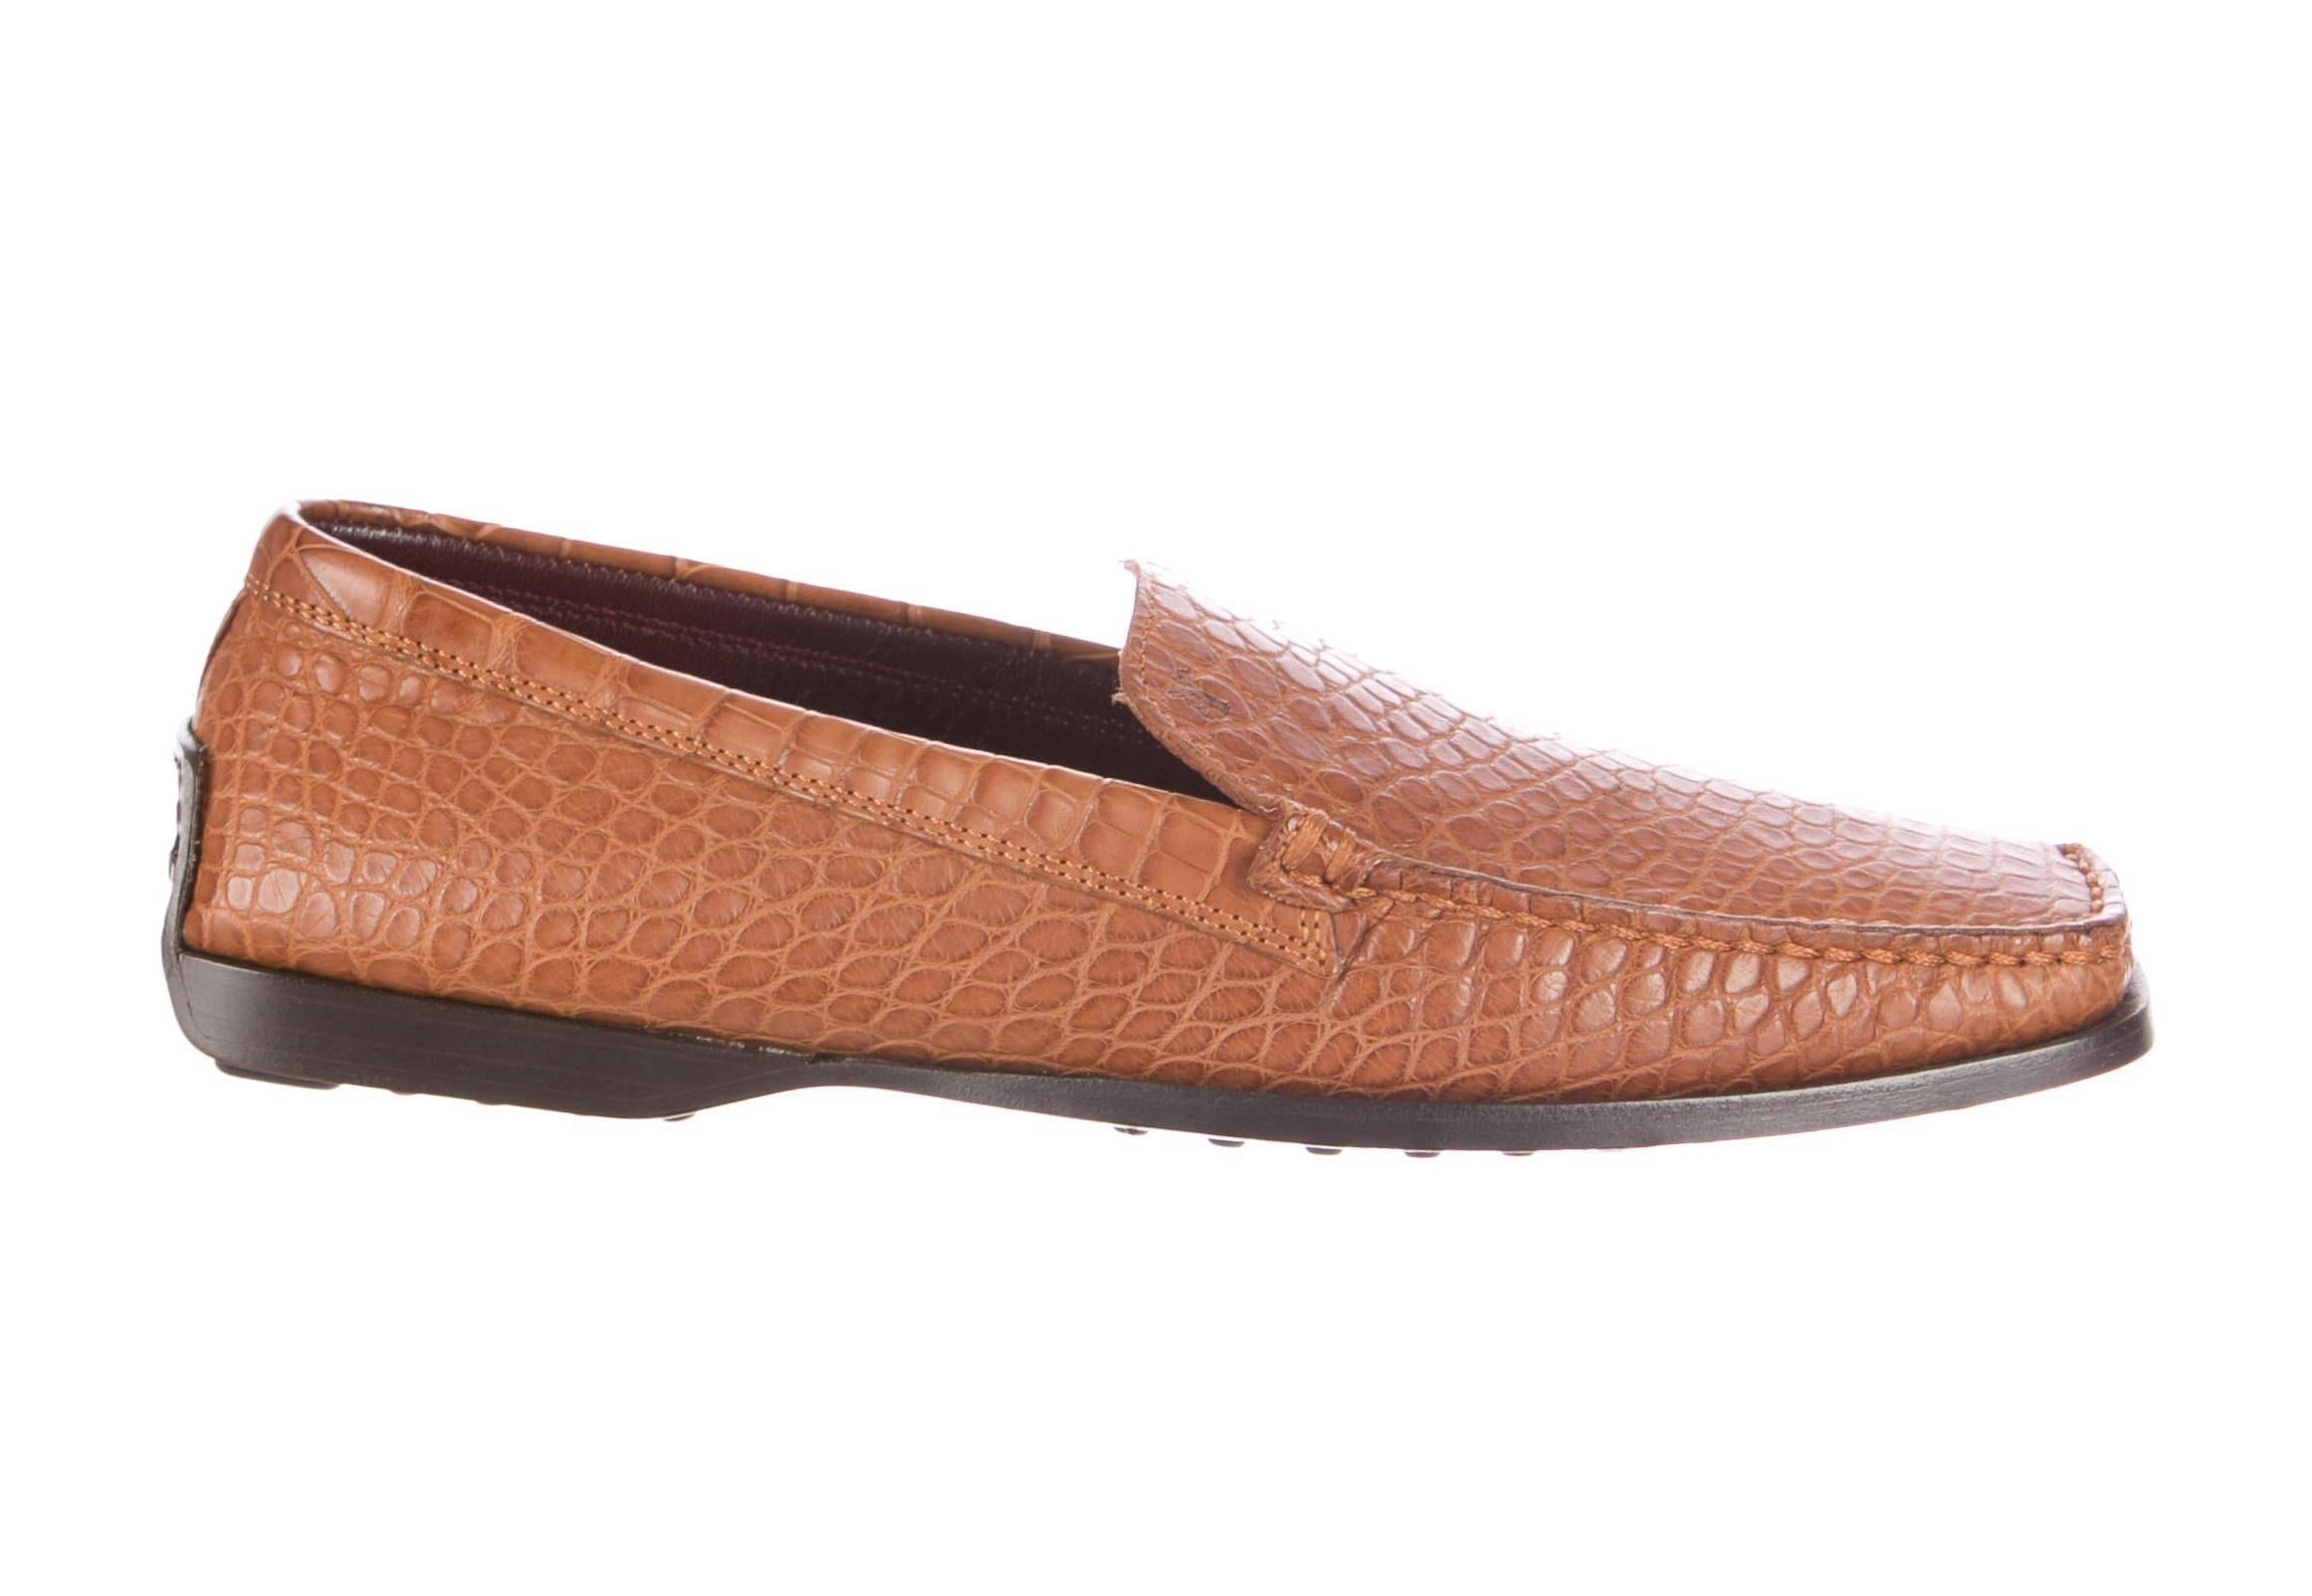 AMAZING TOD'S ALLIGATOR CROCODILE SKIN MOCCASINS

DETAILS:

    A signature piece that will last you for years
    Pure luxury
    Beautiful exotic skin - real alligator leather - no print
    Welt-sewn leather sole hand-stitched
    Size US 8
   